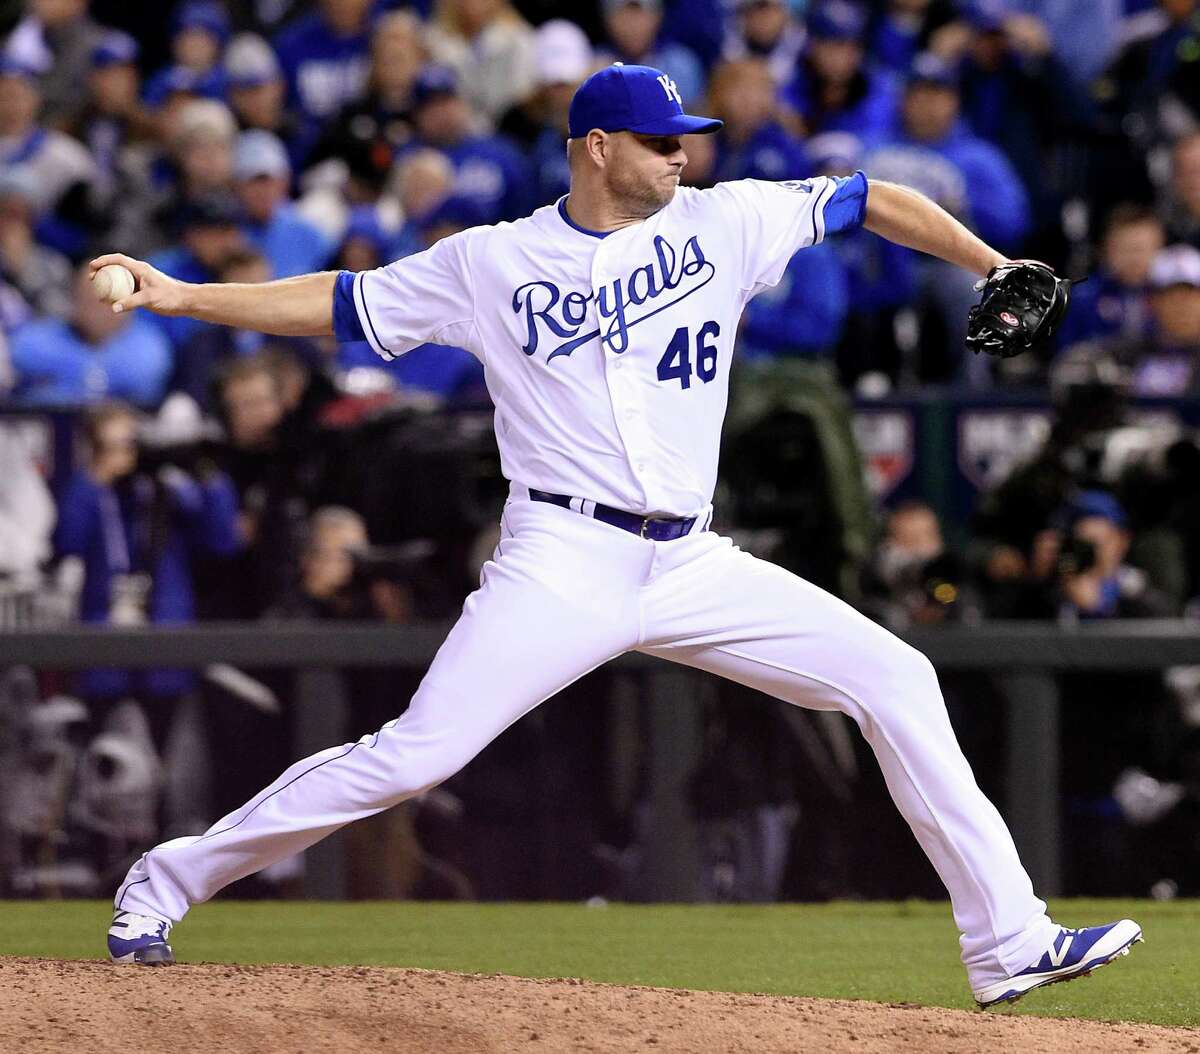 Oakland A's pitcher Ryan Madson, who once pitched for the Royals in the World Series, has been traded to the Nationals along with fellow reliever Sean Doolittle.